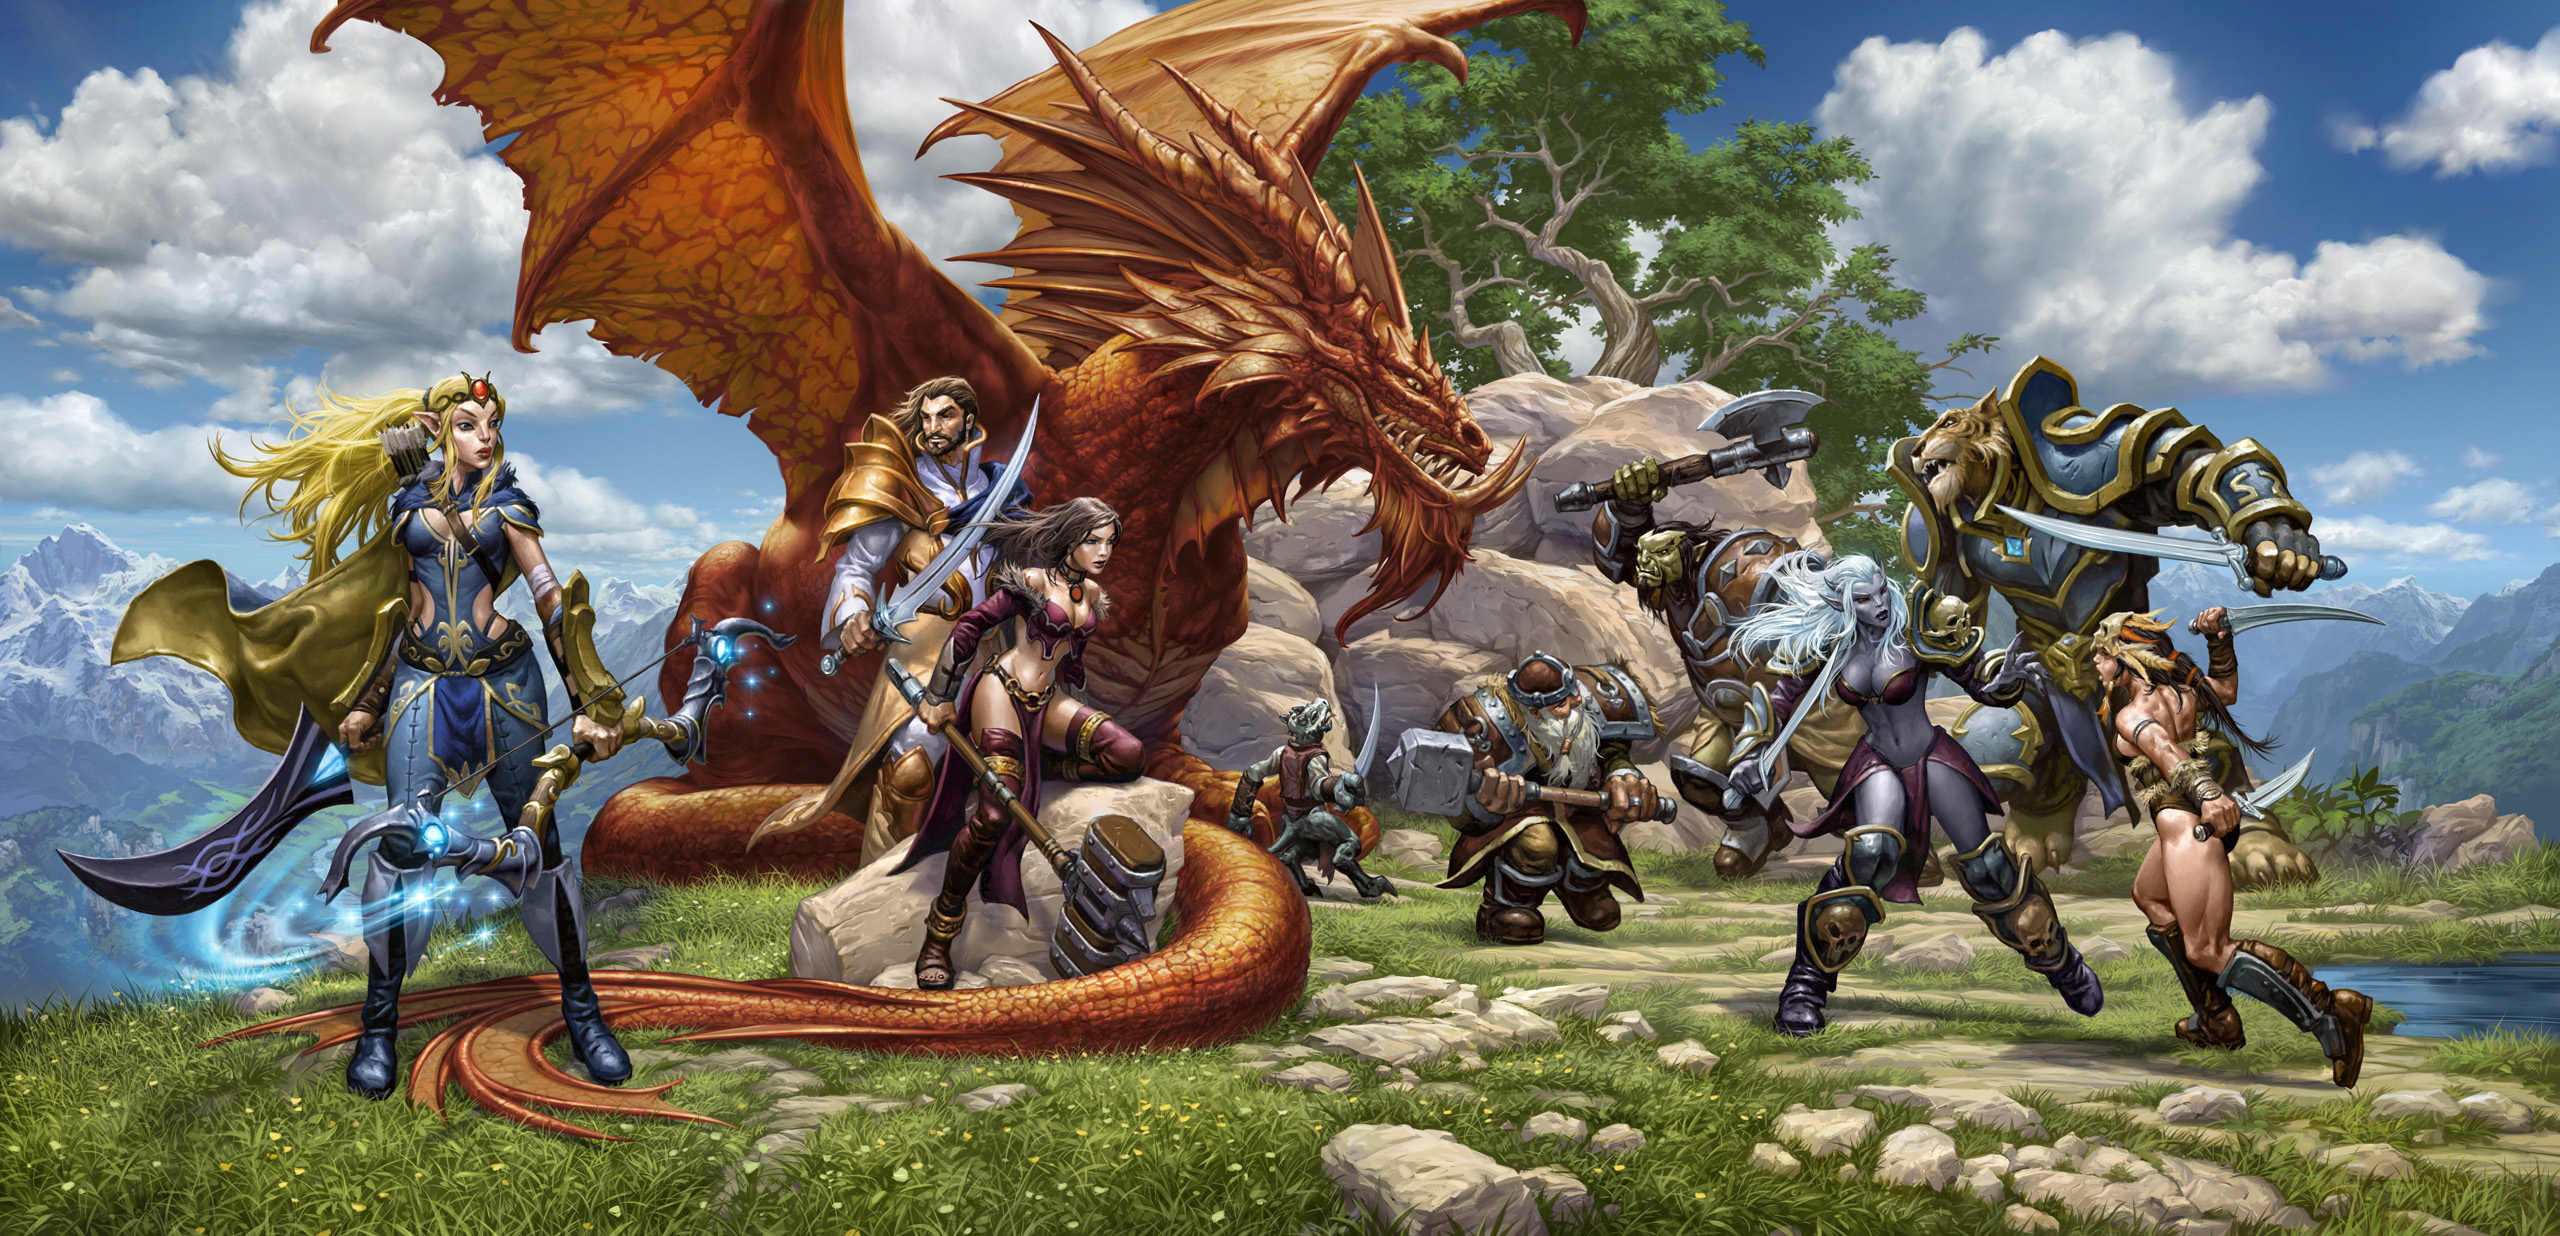 Source Image Illustration - EverQuest Next - Sony Online Entertainment - © Sony (Game illustration)